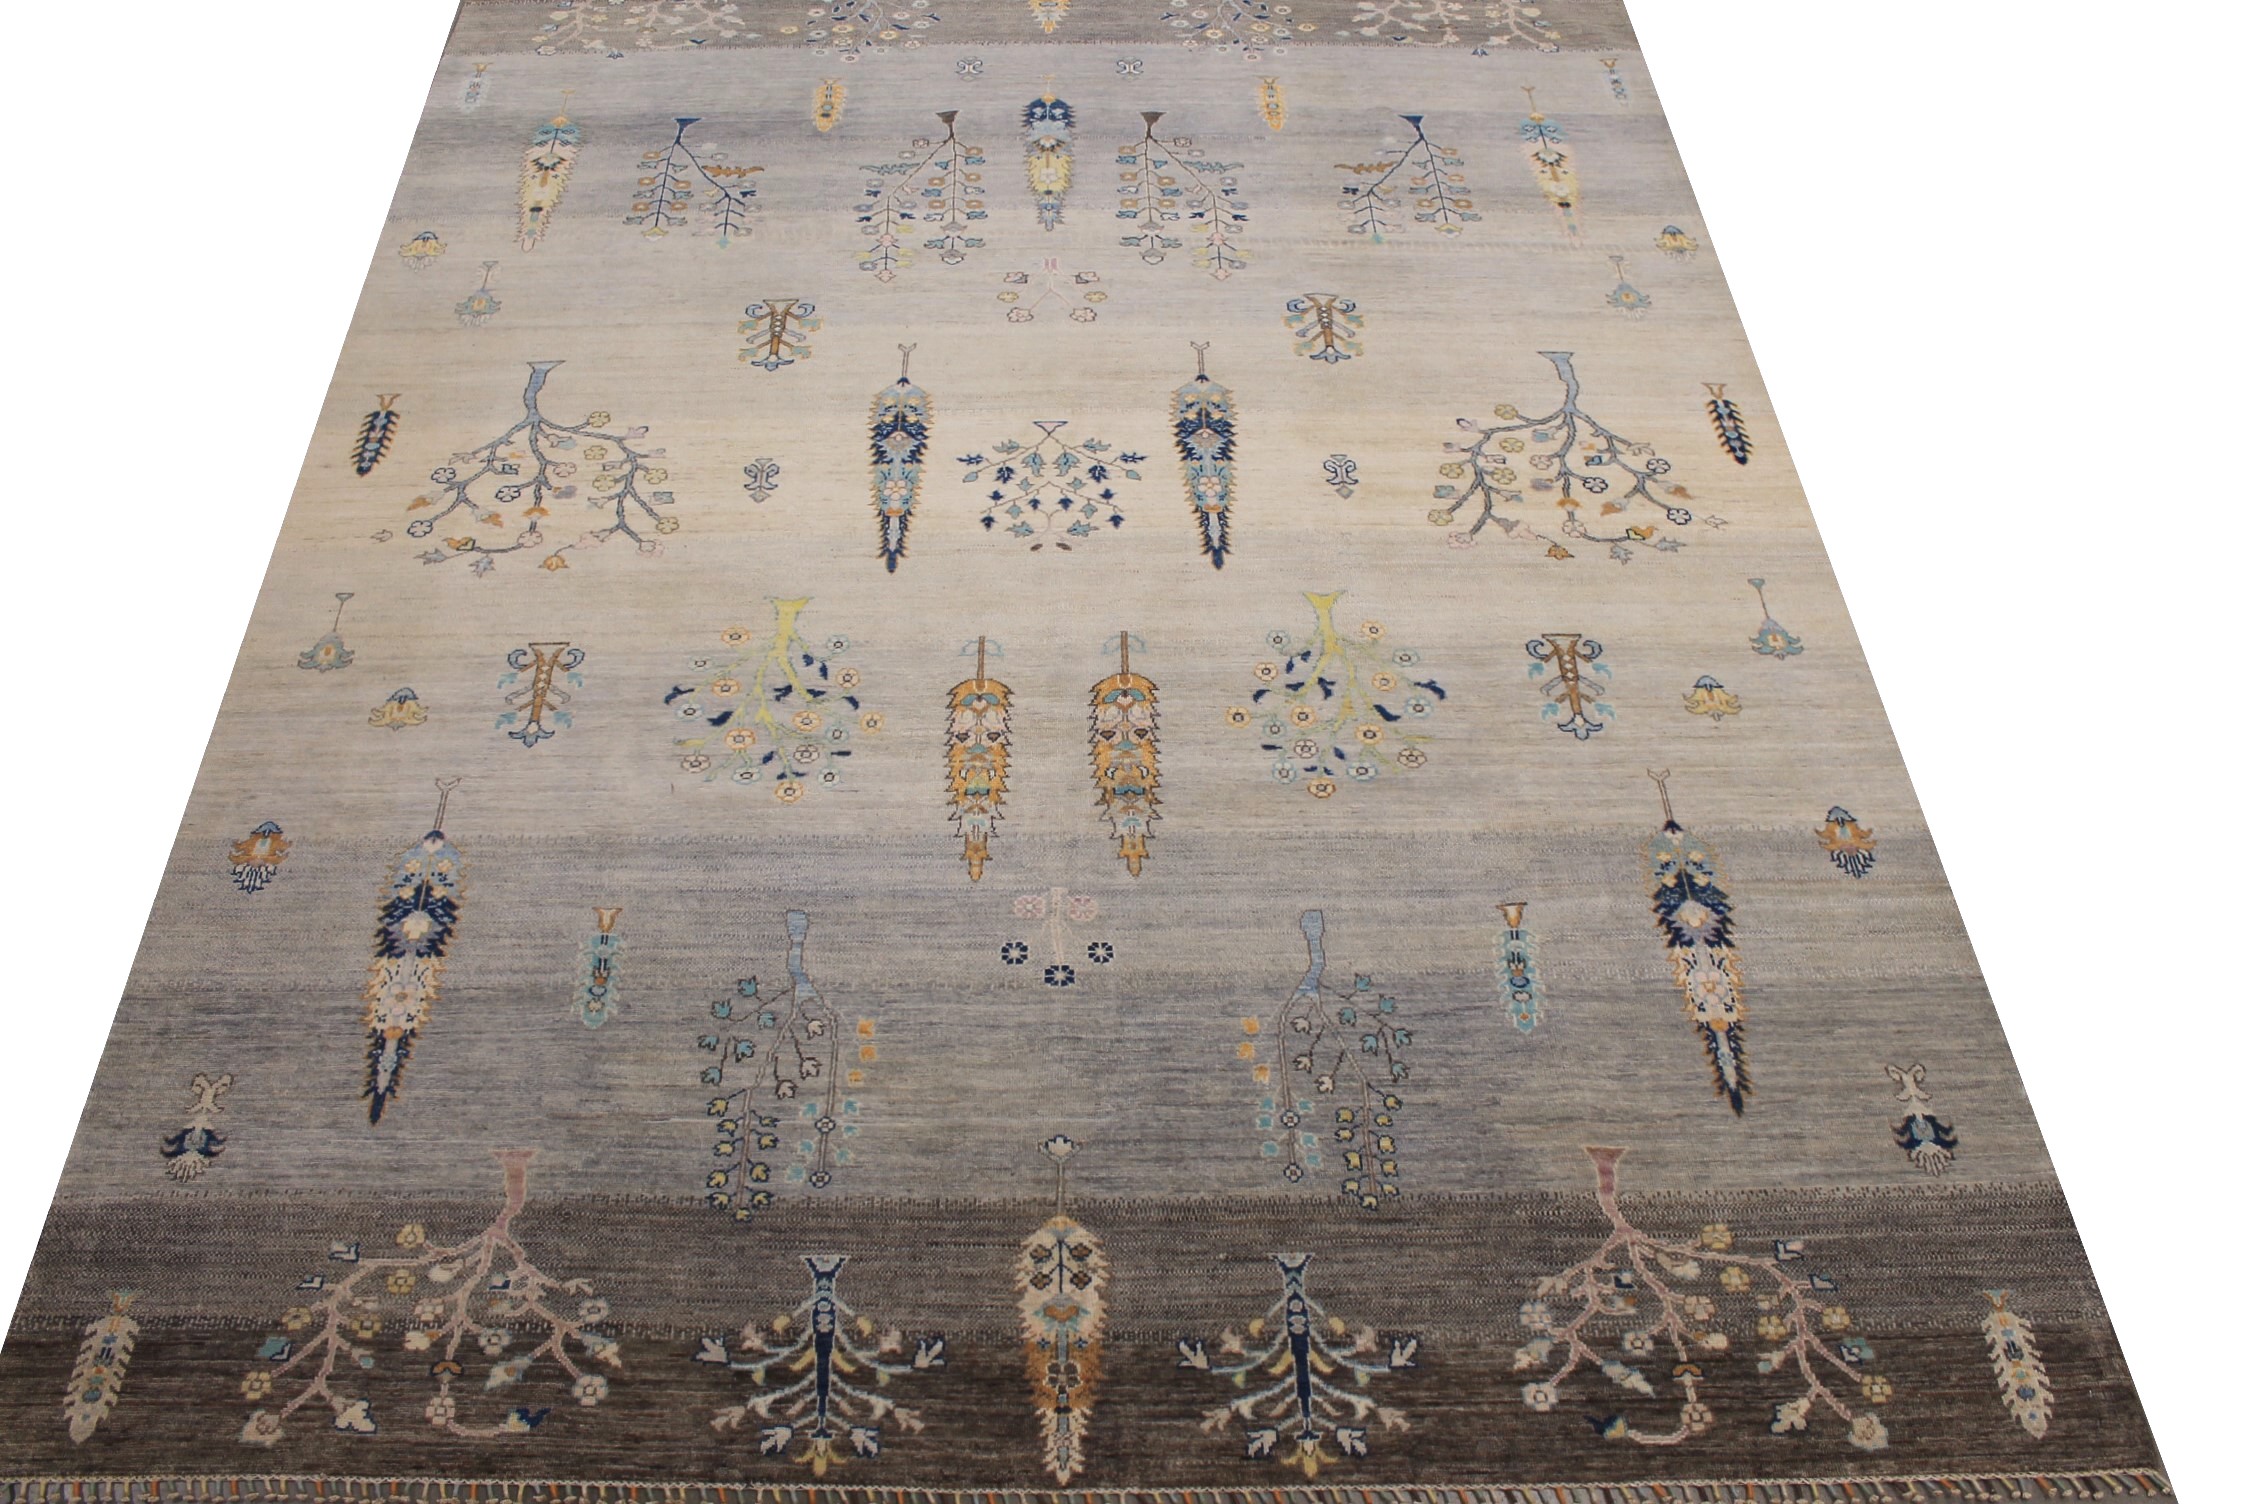 9x12 Aryana & Antique Revivals Hand Knotted Wool Area Rug - MR026143